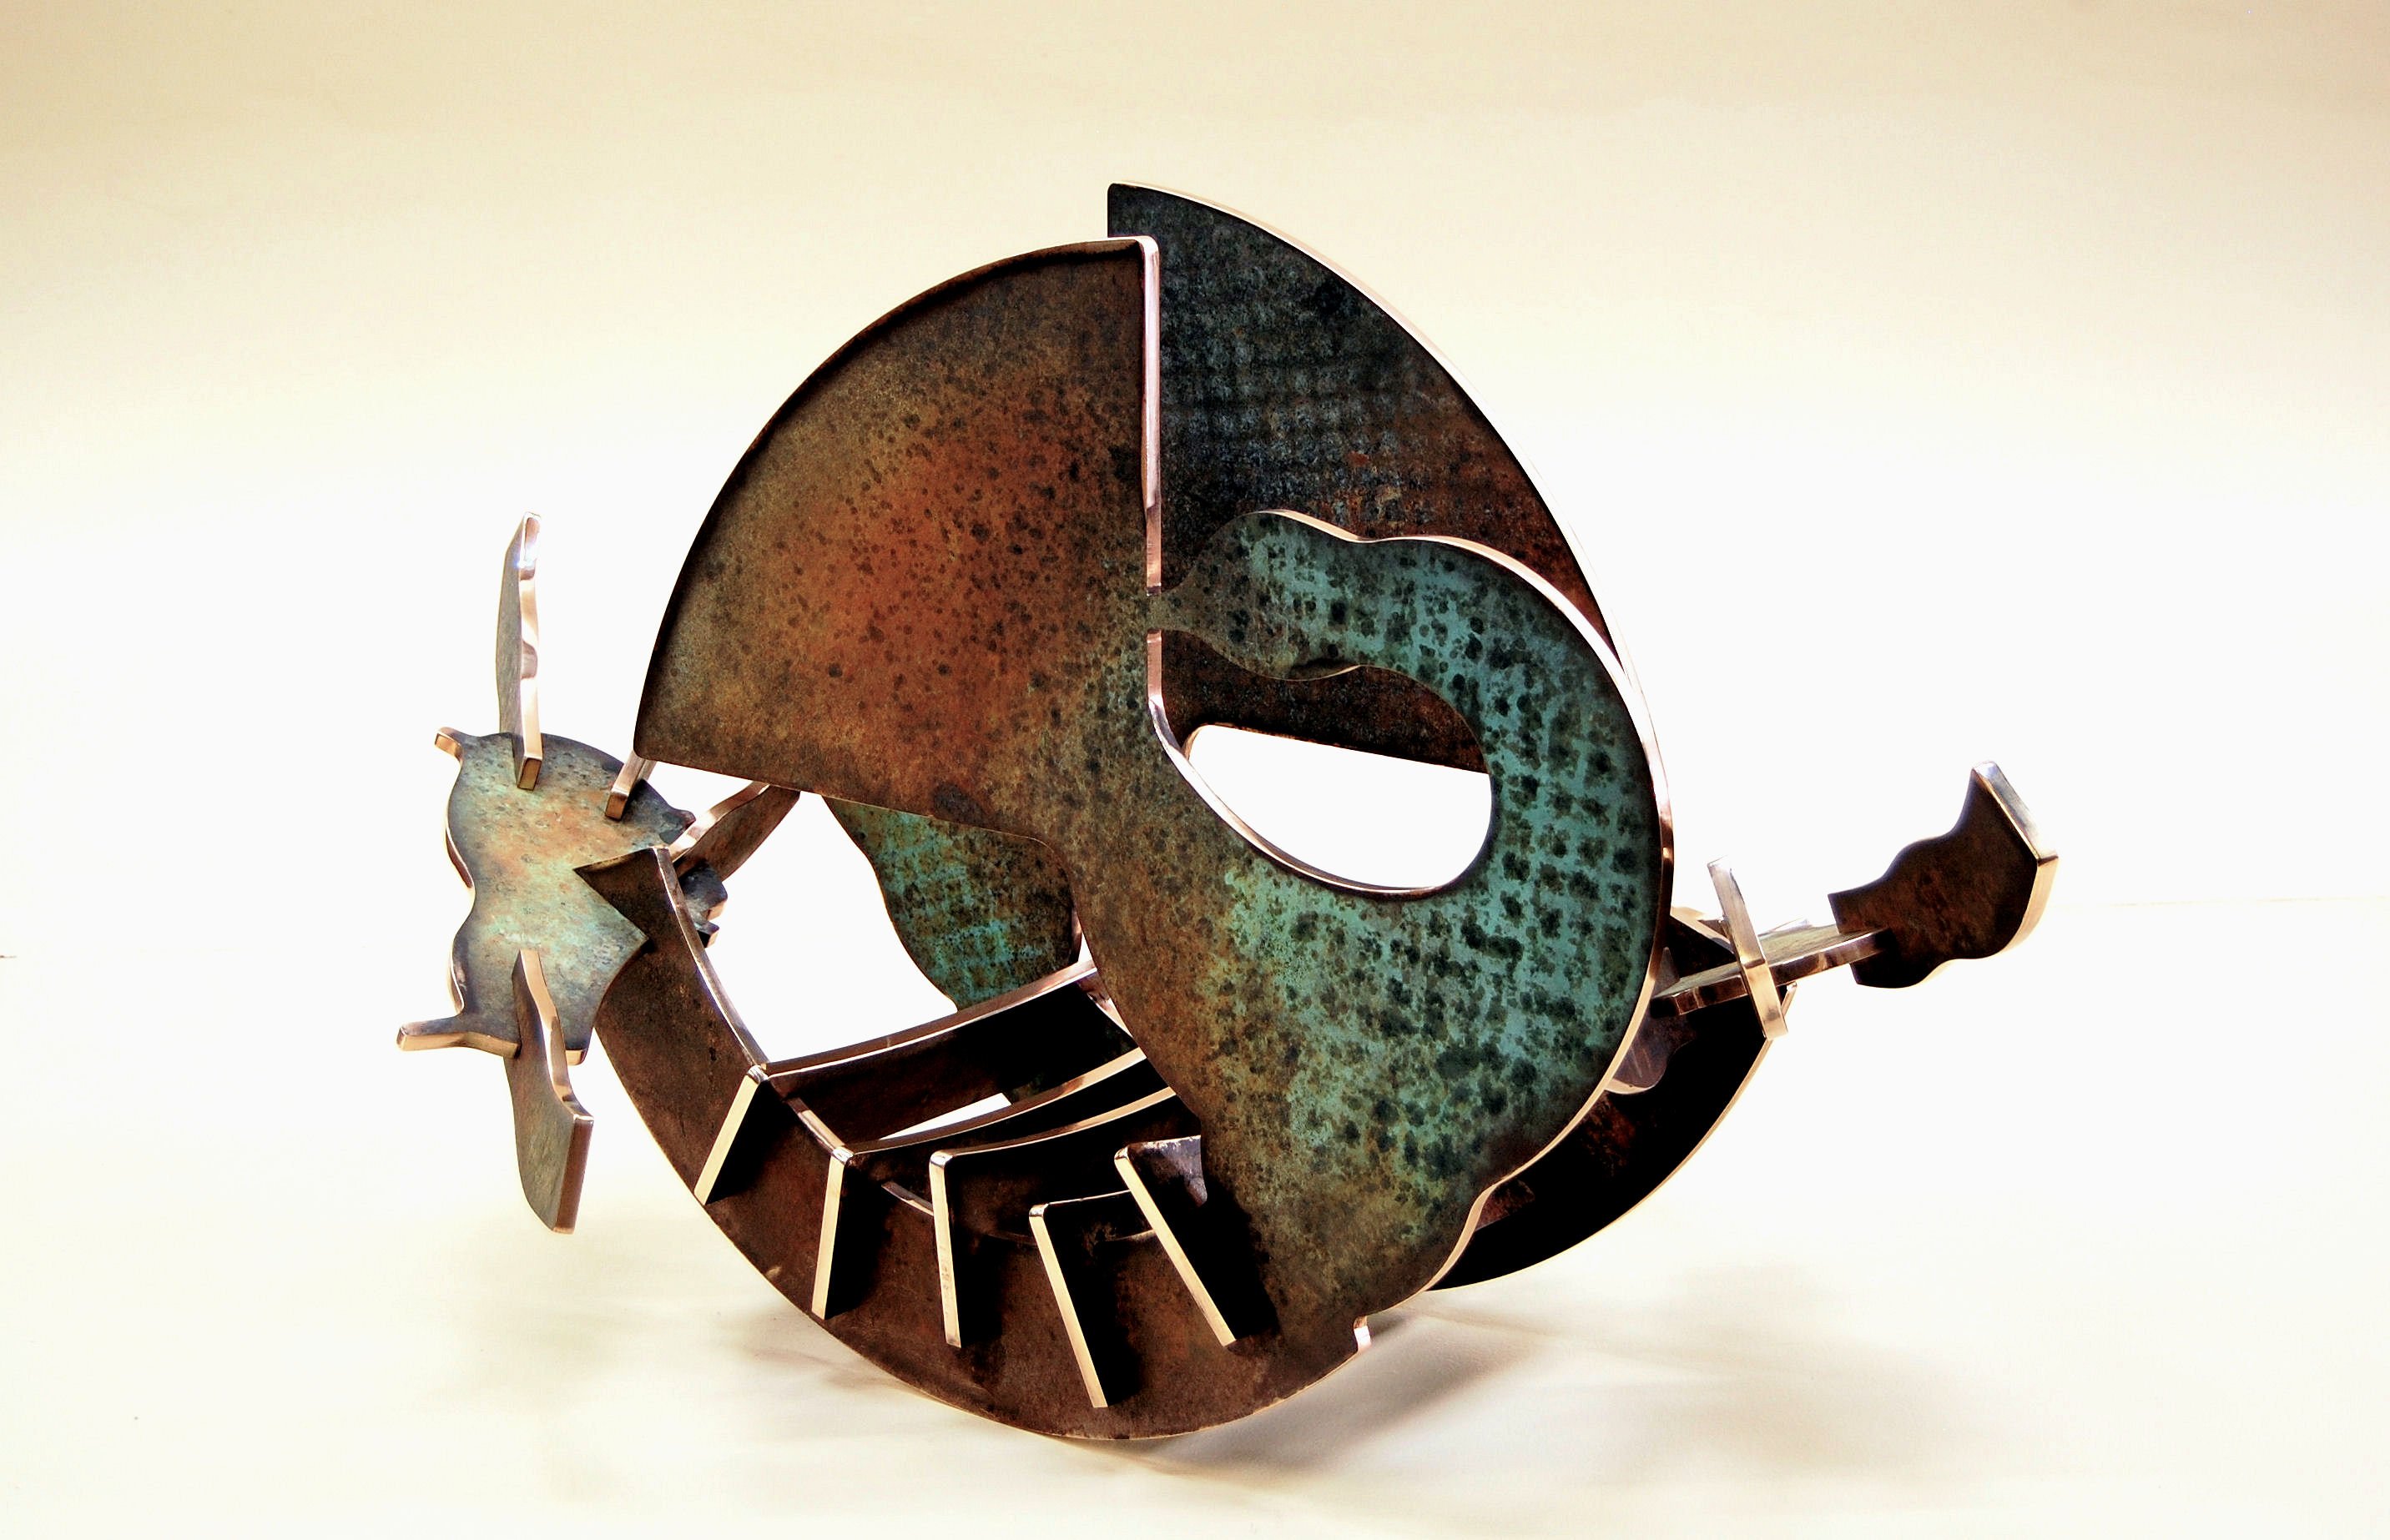 In Retrospect - 2011, Fabricated Bronze with Hot Patina, 23” x 43” x 26” 
